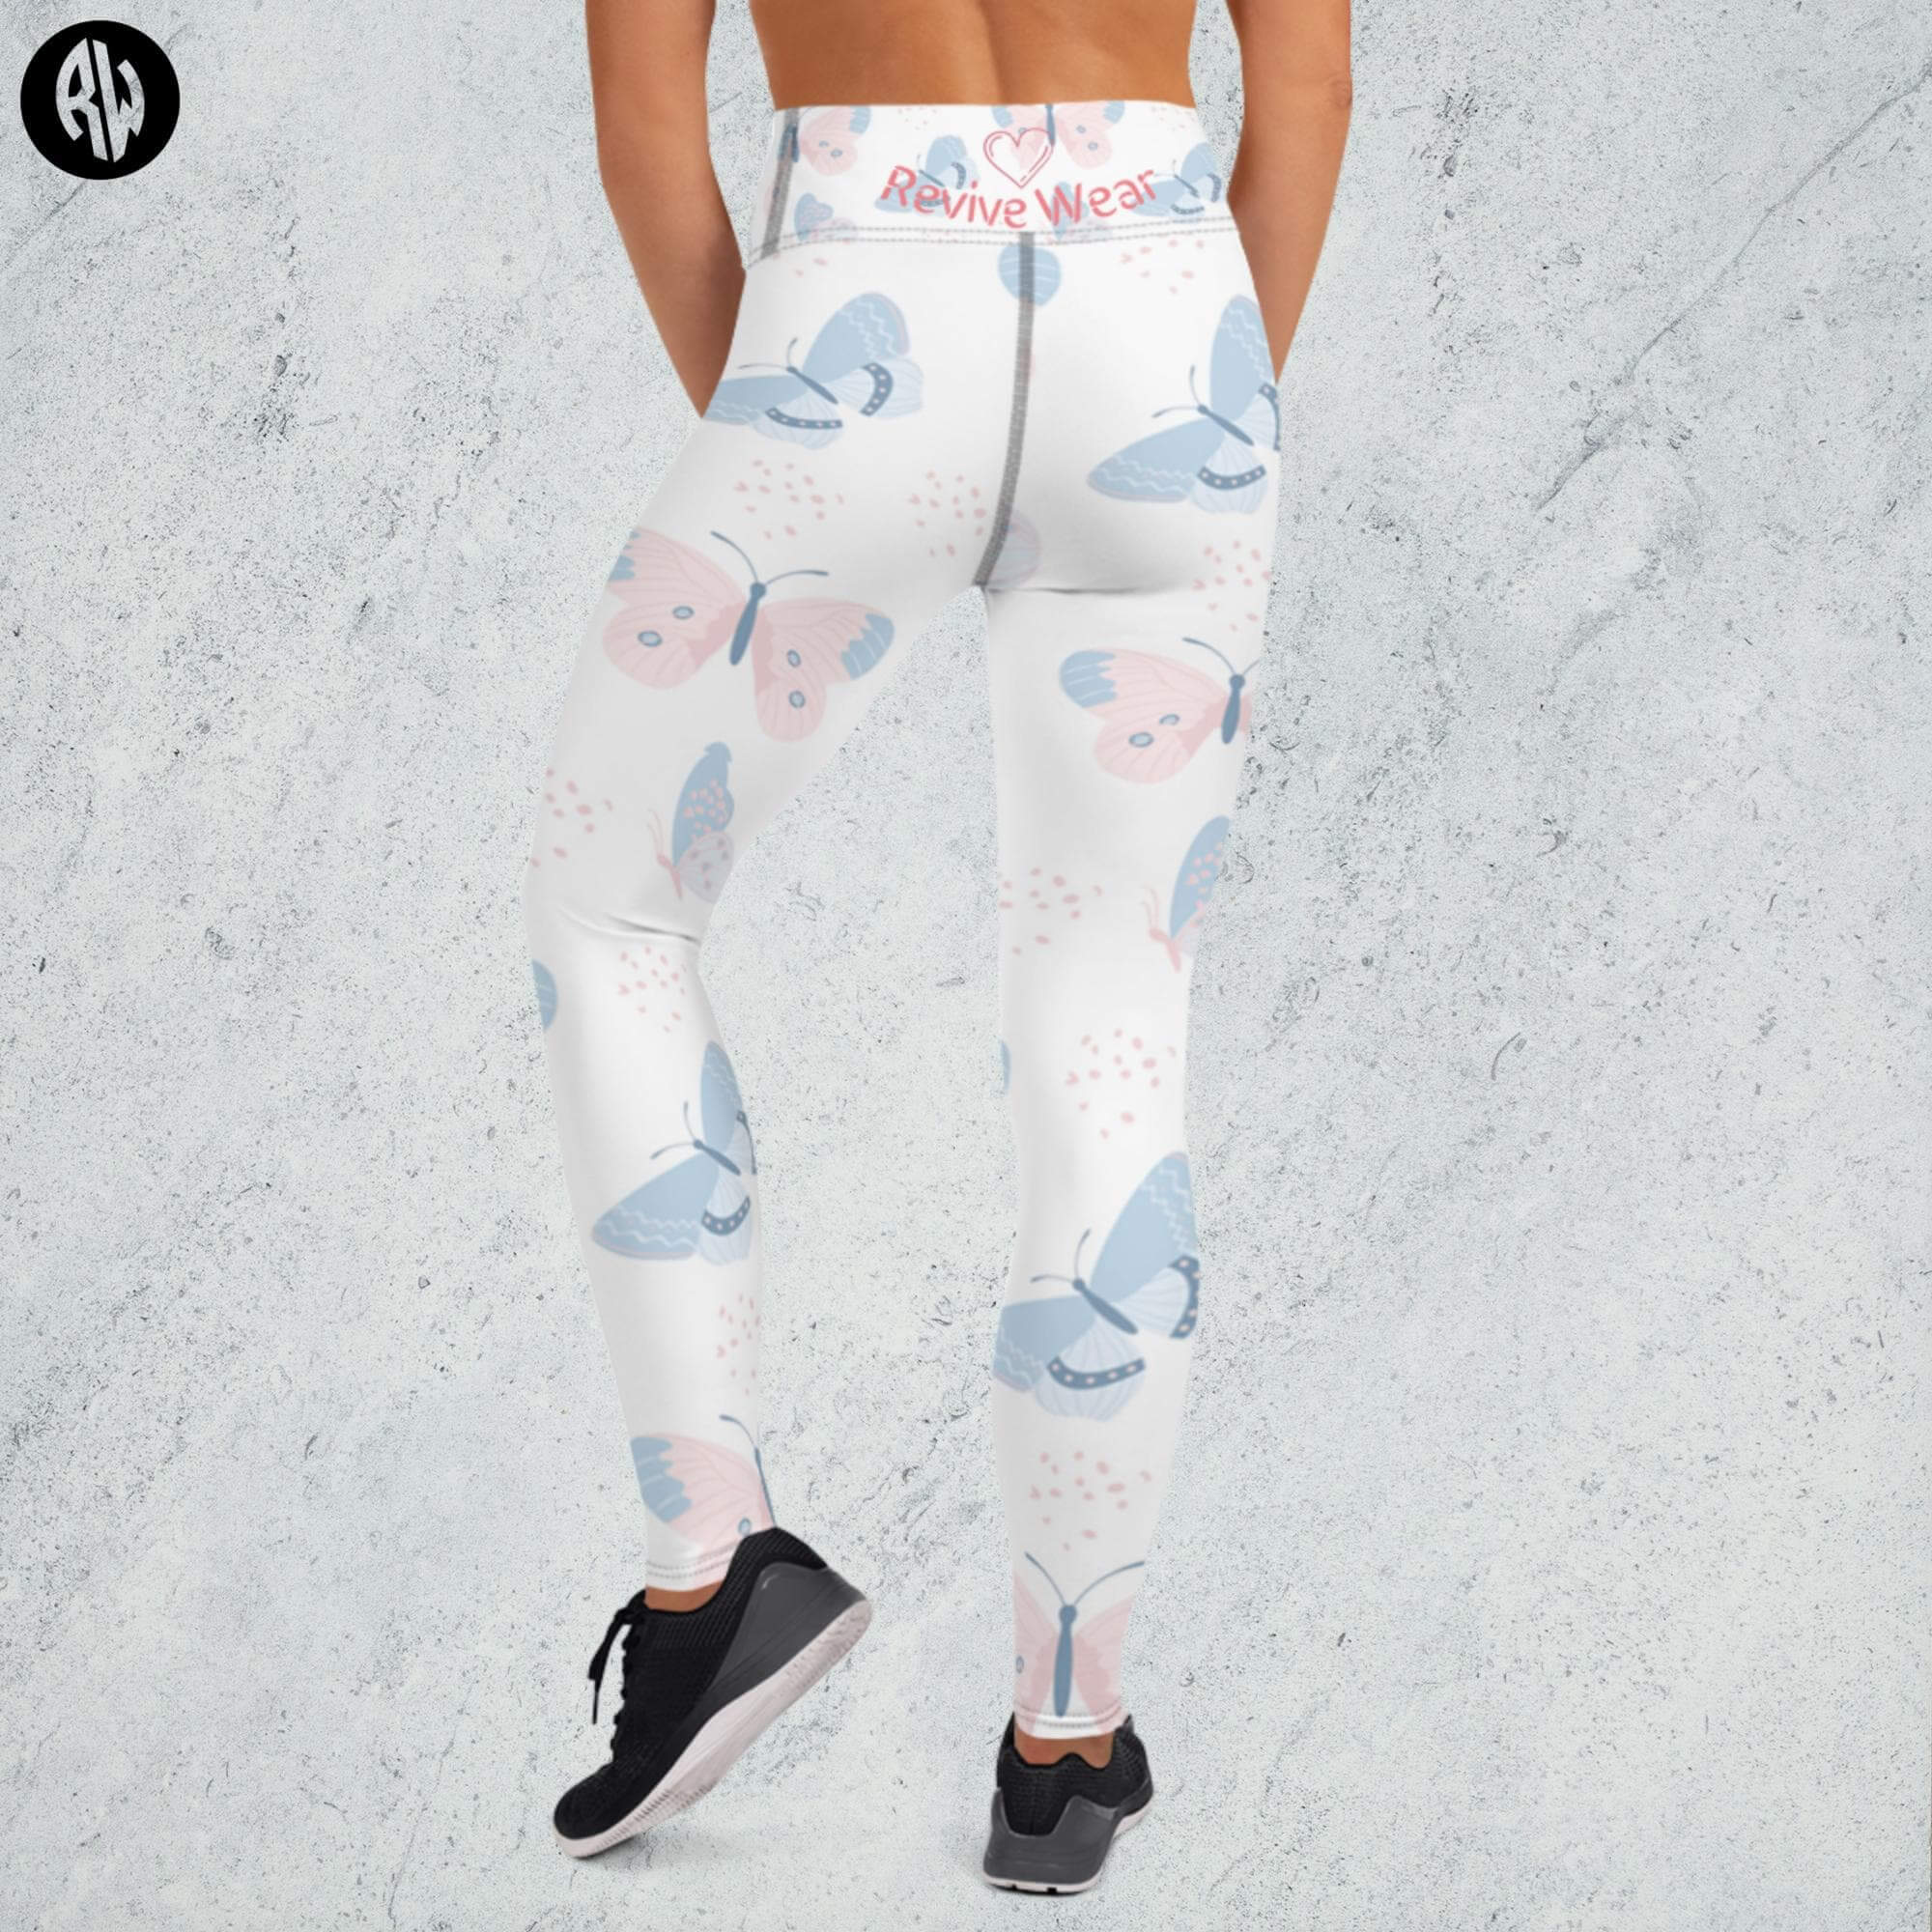 Yoga Pants Bliss High Waisted by Revive Wear - Revive Wear     Yoga Pants, premium quality fitness leggings for your next workout sessions. They are super soft, comfy to wear, and stylish. Free Delivery Available.